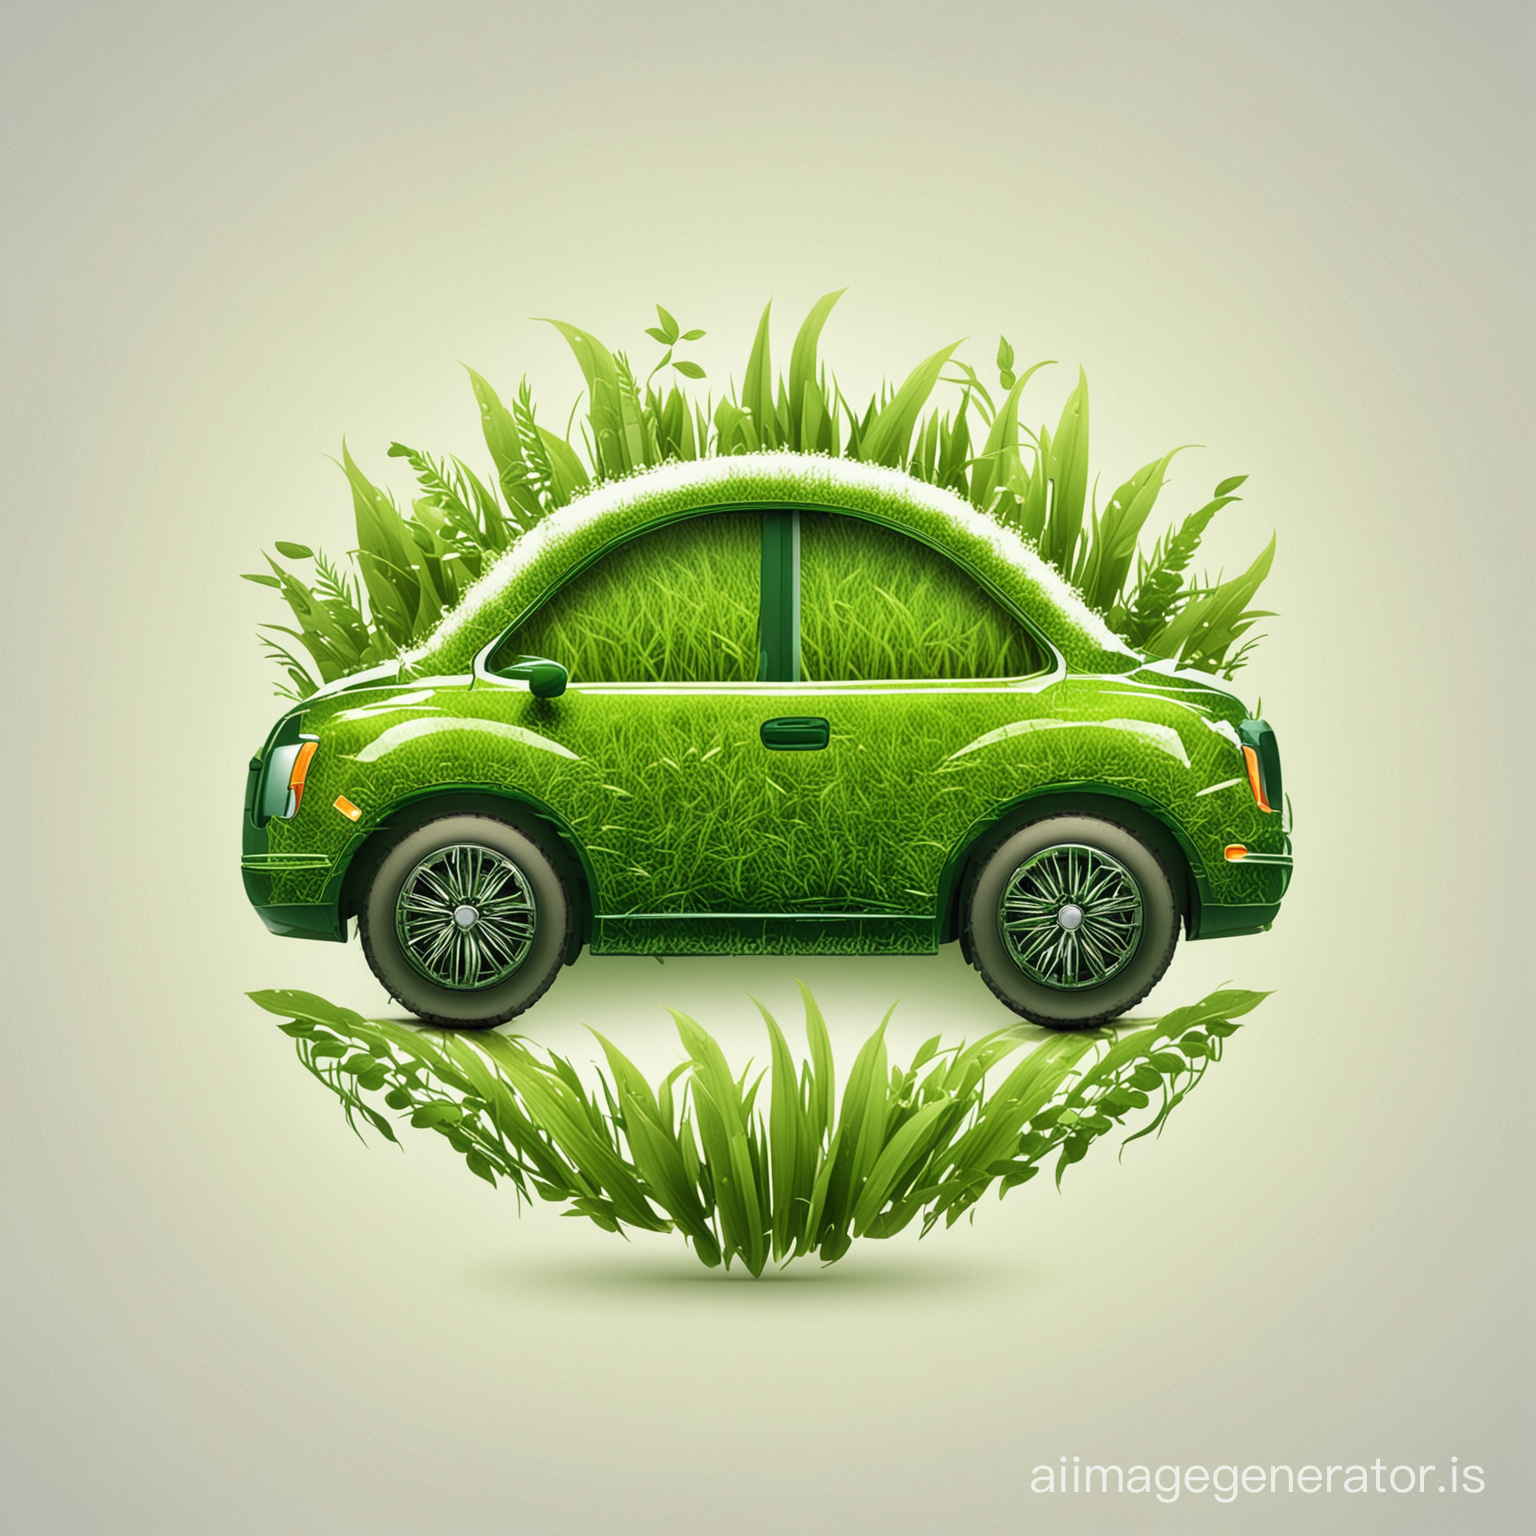 Eco friendly car icon with green grass